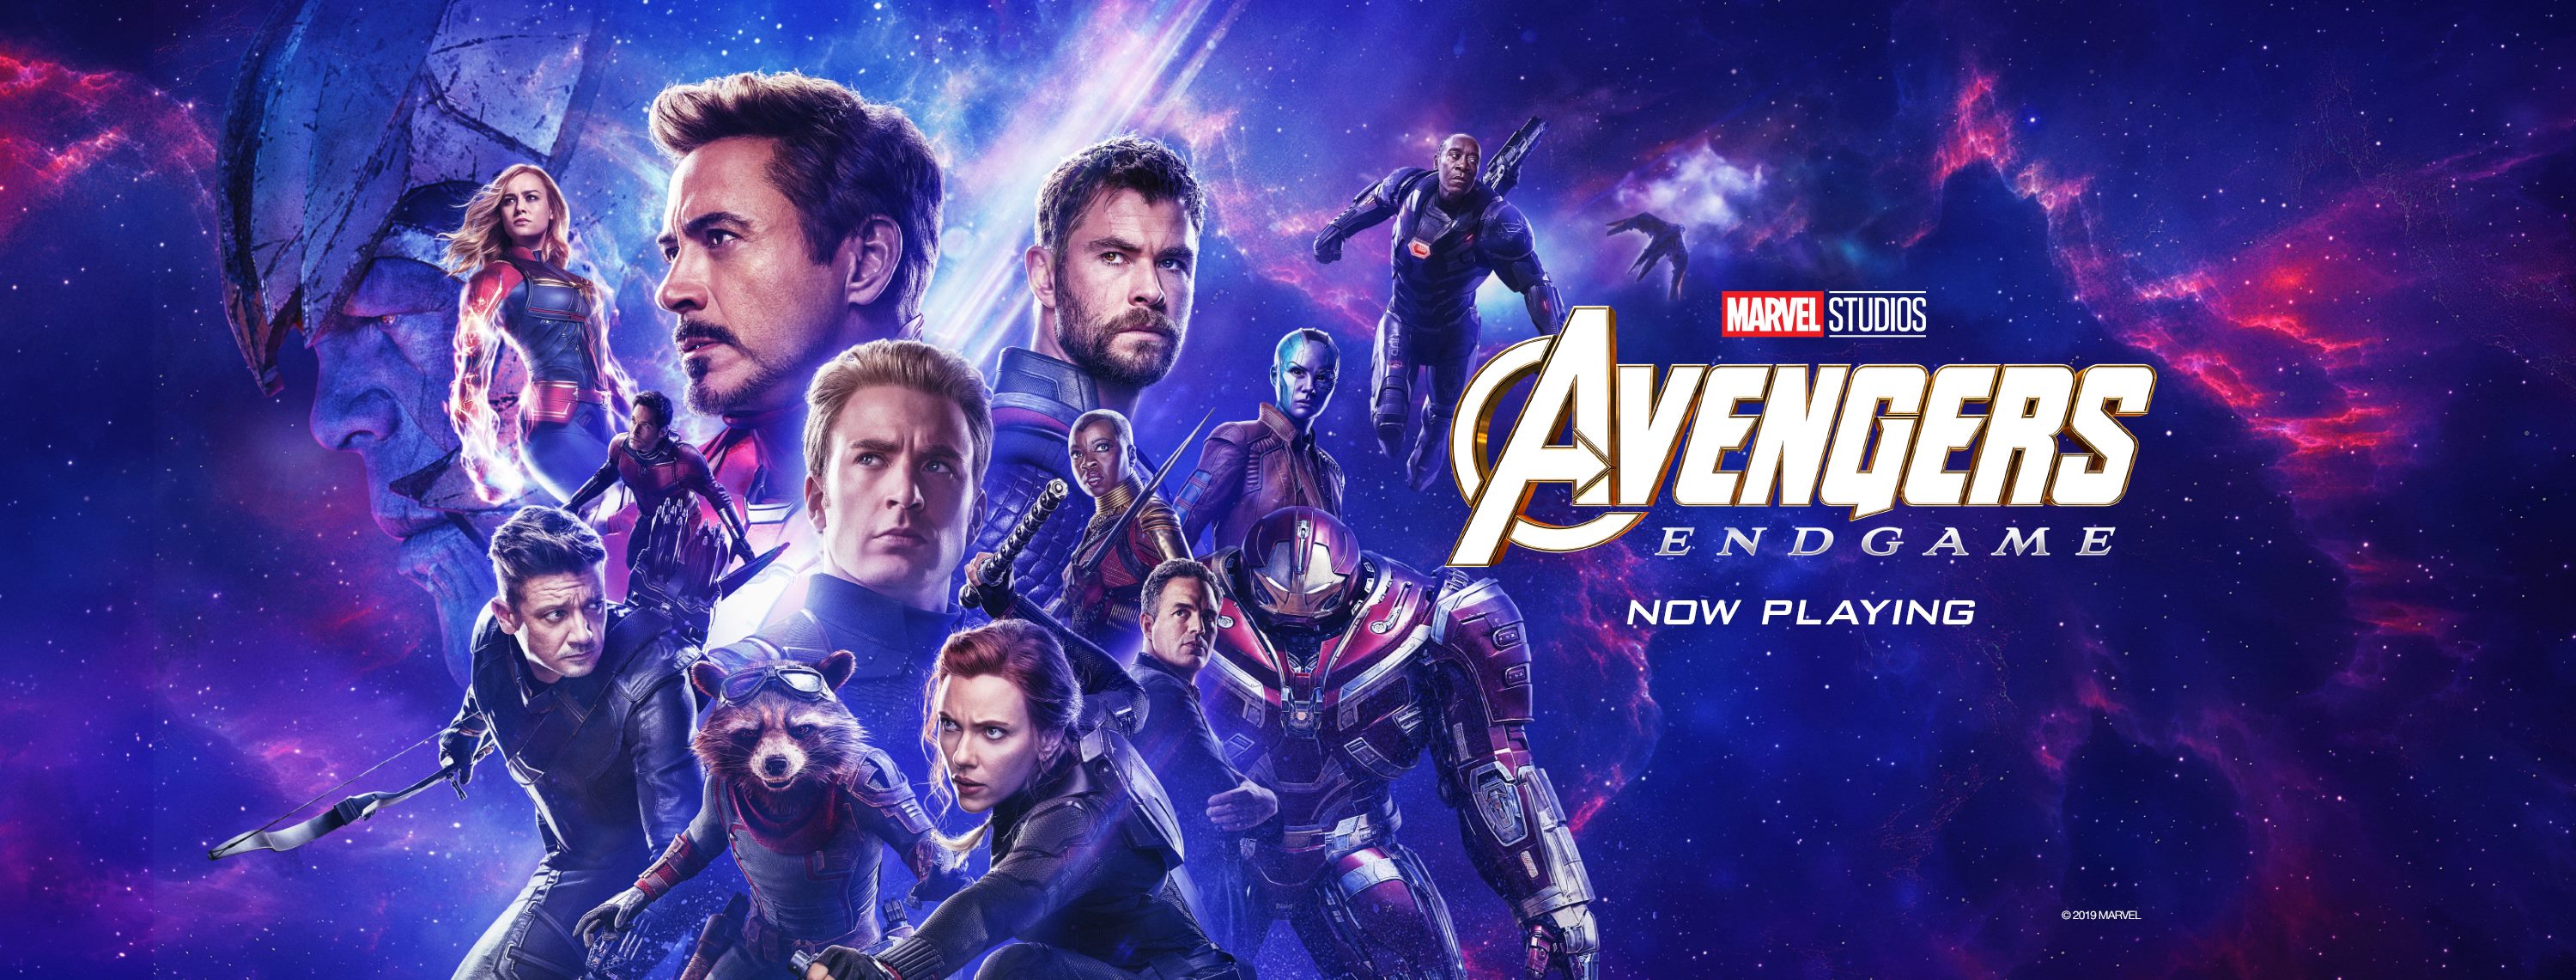 Avengers: Endgame topping box office charts in Hungary! - Daily News Hungary